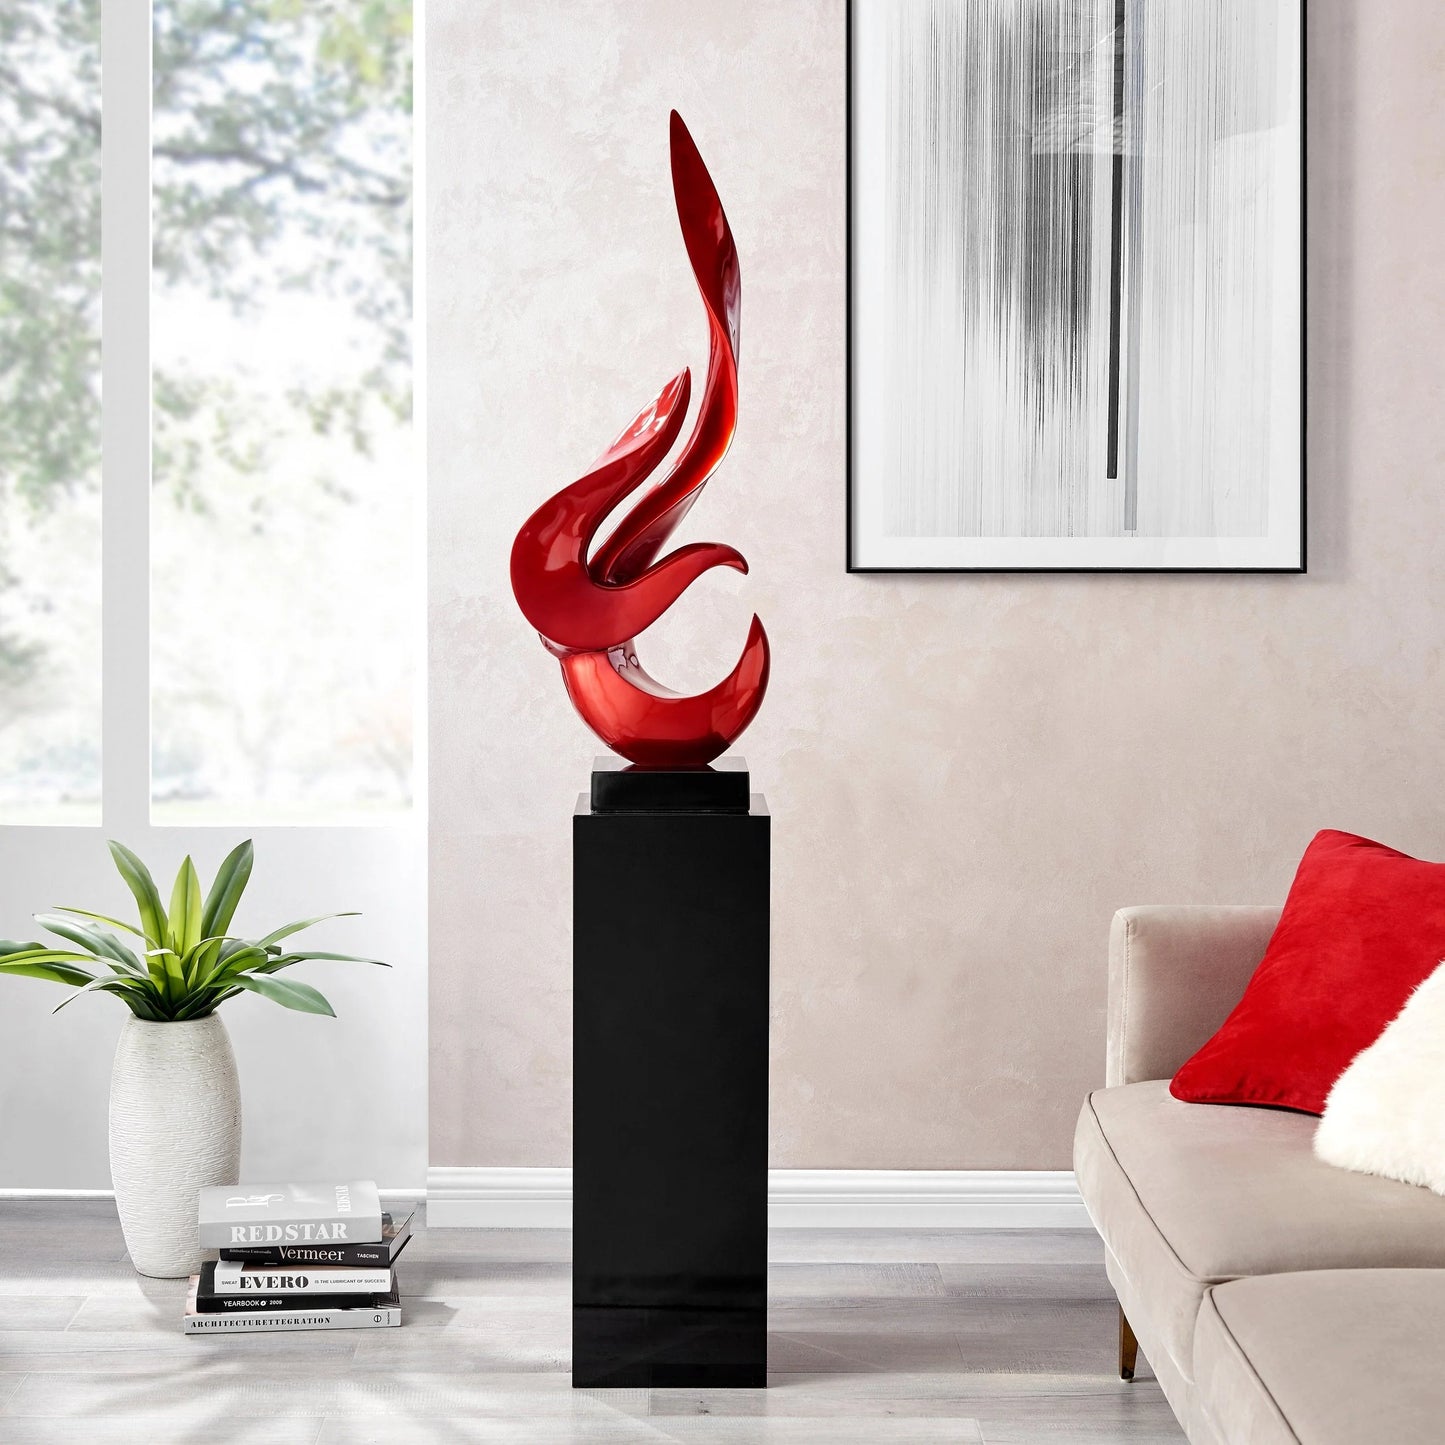 Finesse Decor Metallic Red Flame Floor Sculpture With Black Stand 2